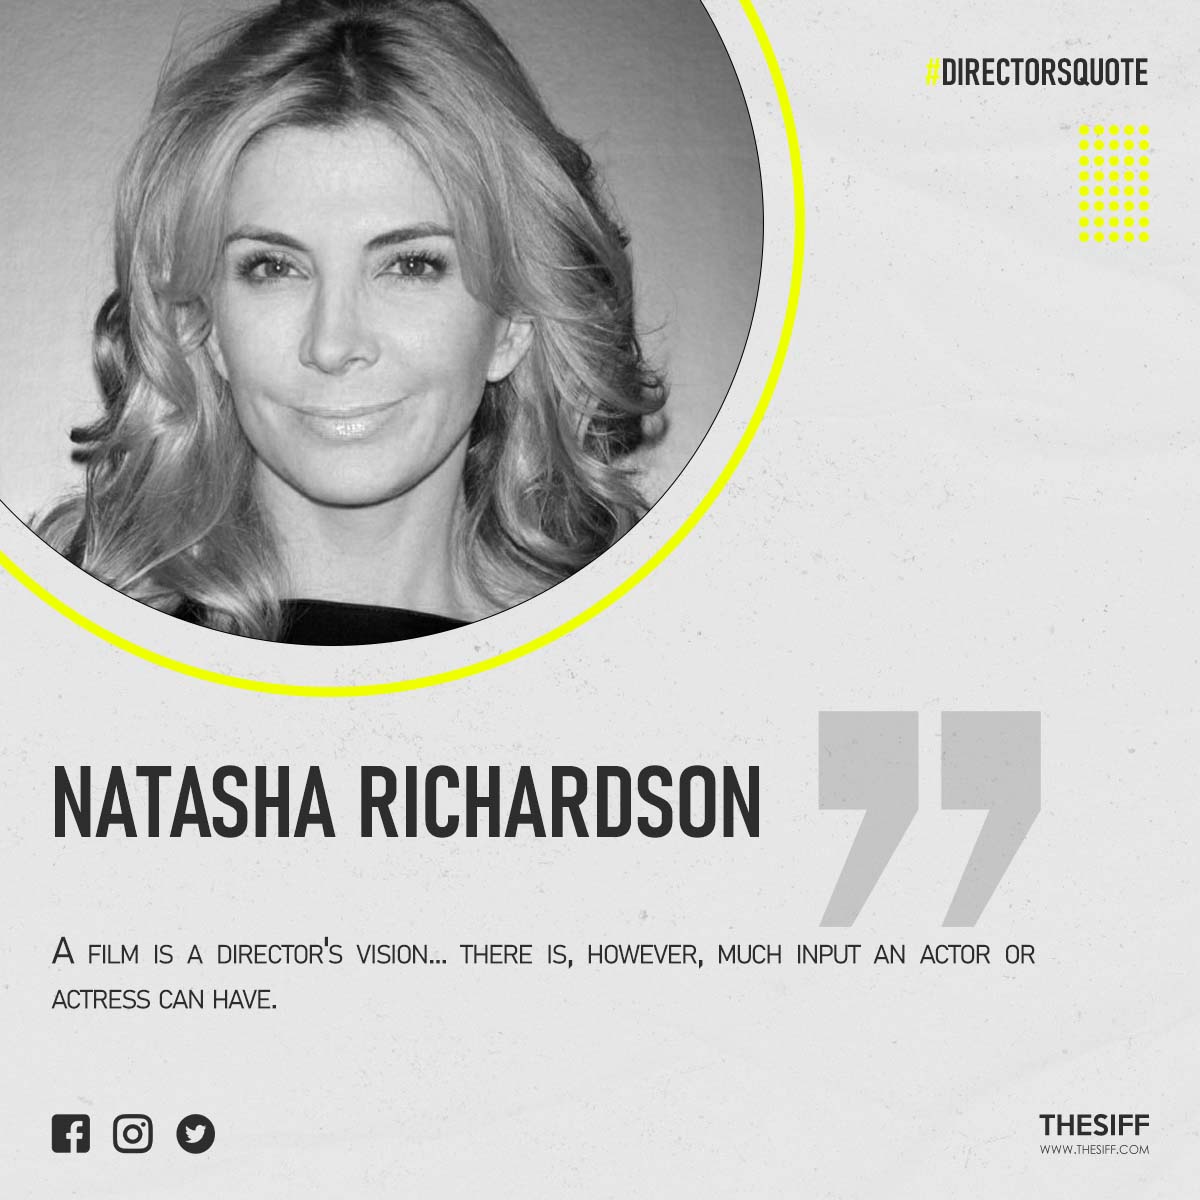 'A film is a director's vision... there is, however, much input an actor or actress can have.' - Natasha Richardson #DirectorsQuote #Quote #NatashaRichardson #siff #siff2024 @Filmfreeway